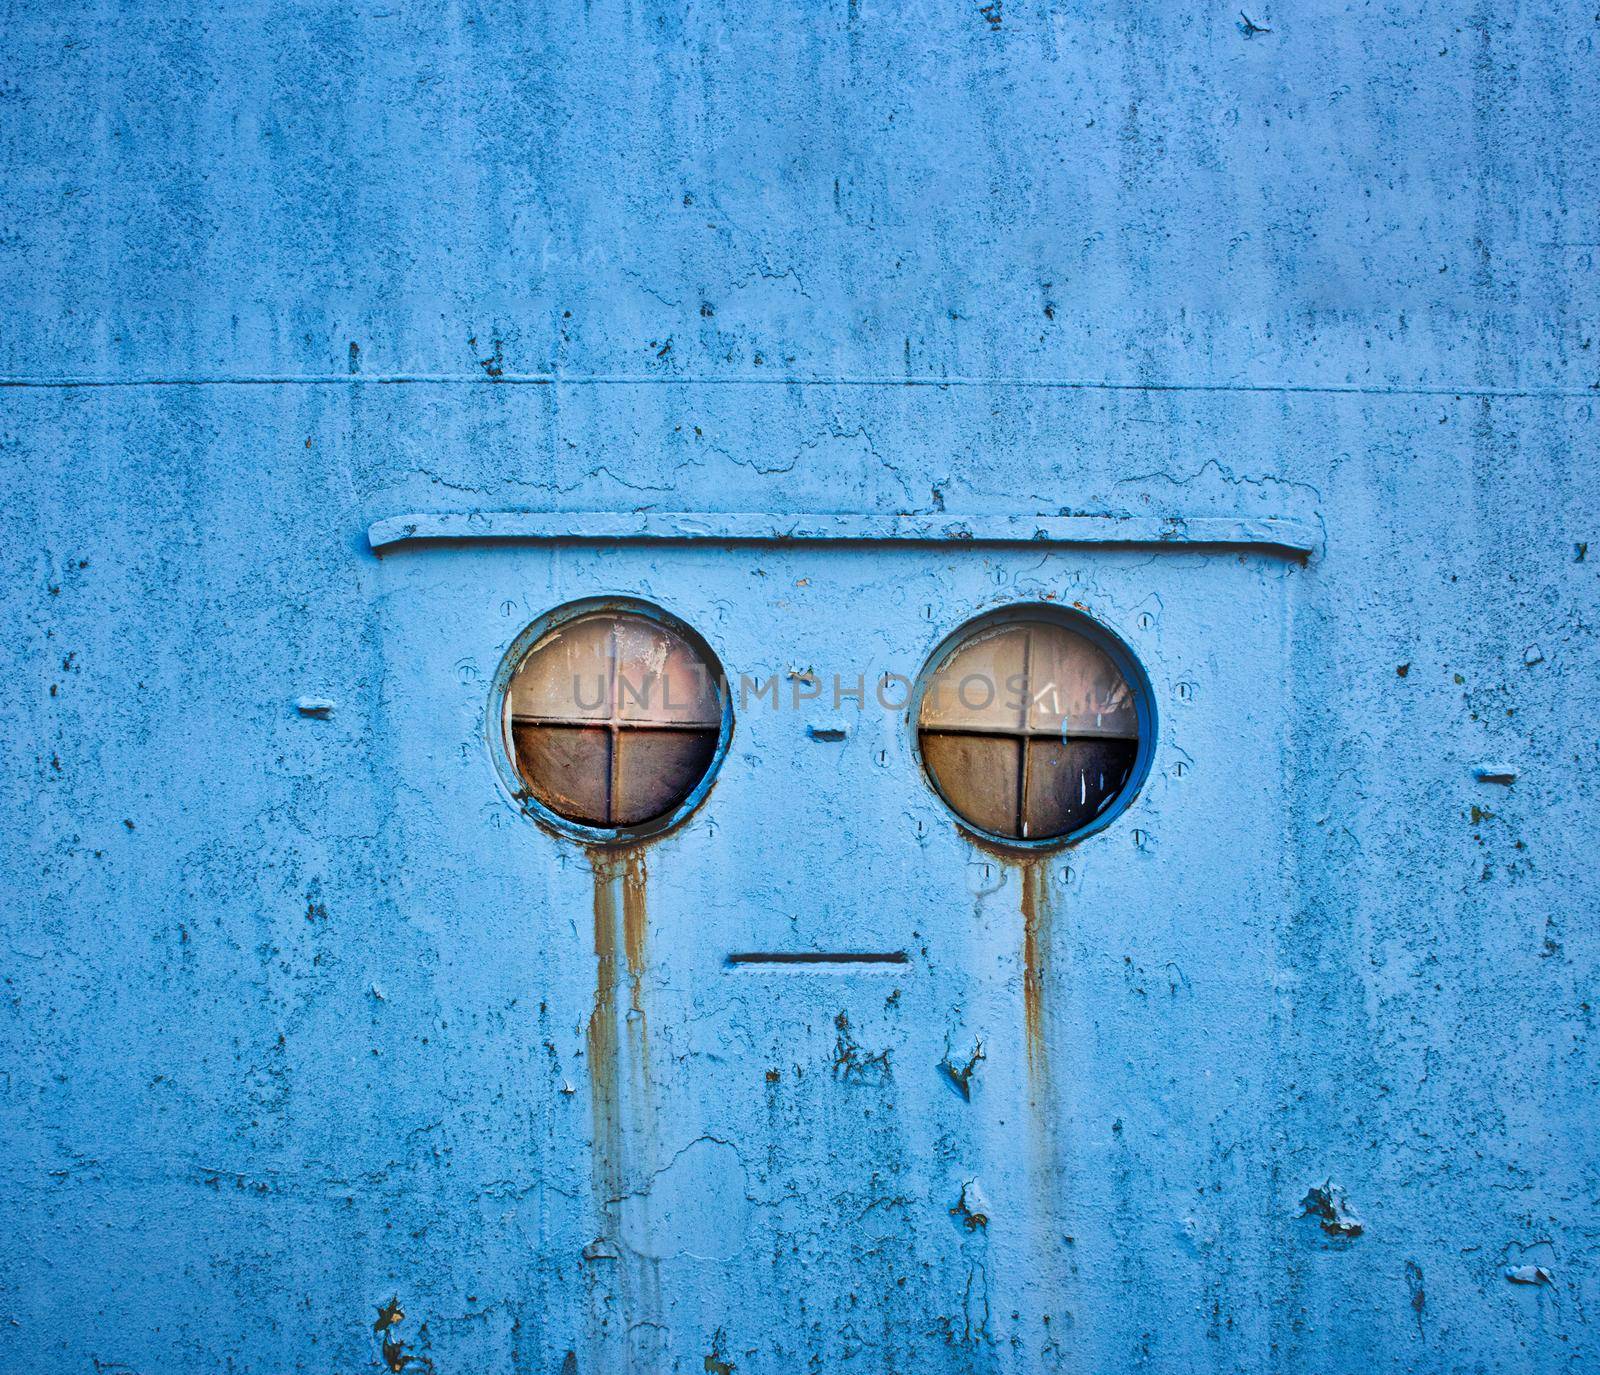 A robotic mechanical face shedding tears in a blue metallic industrial wall